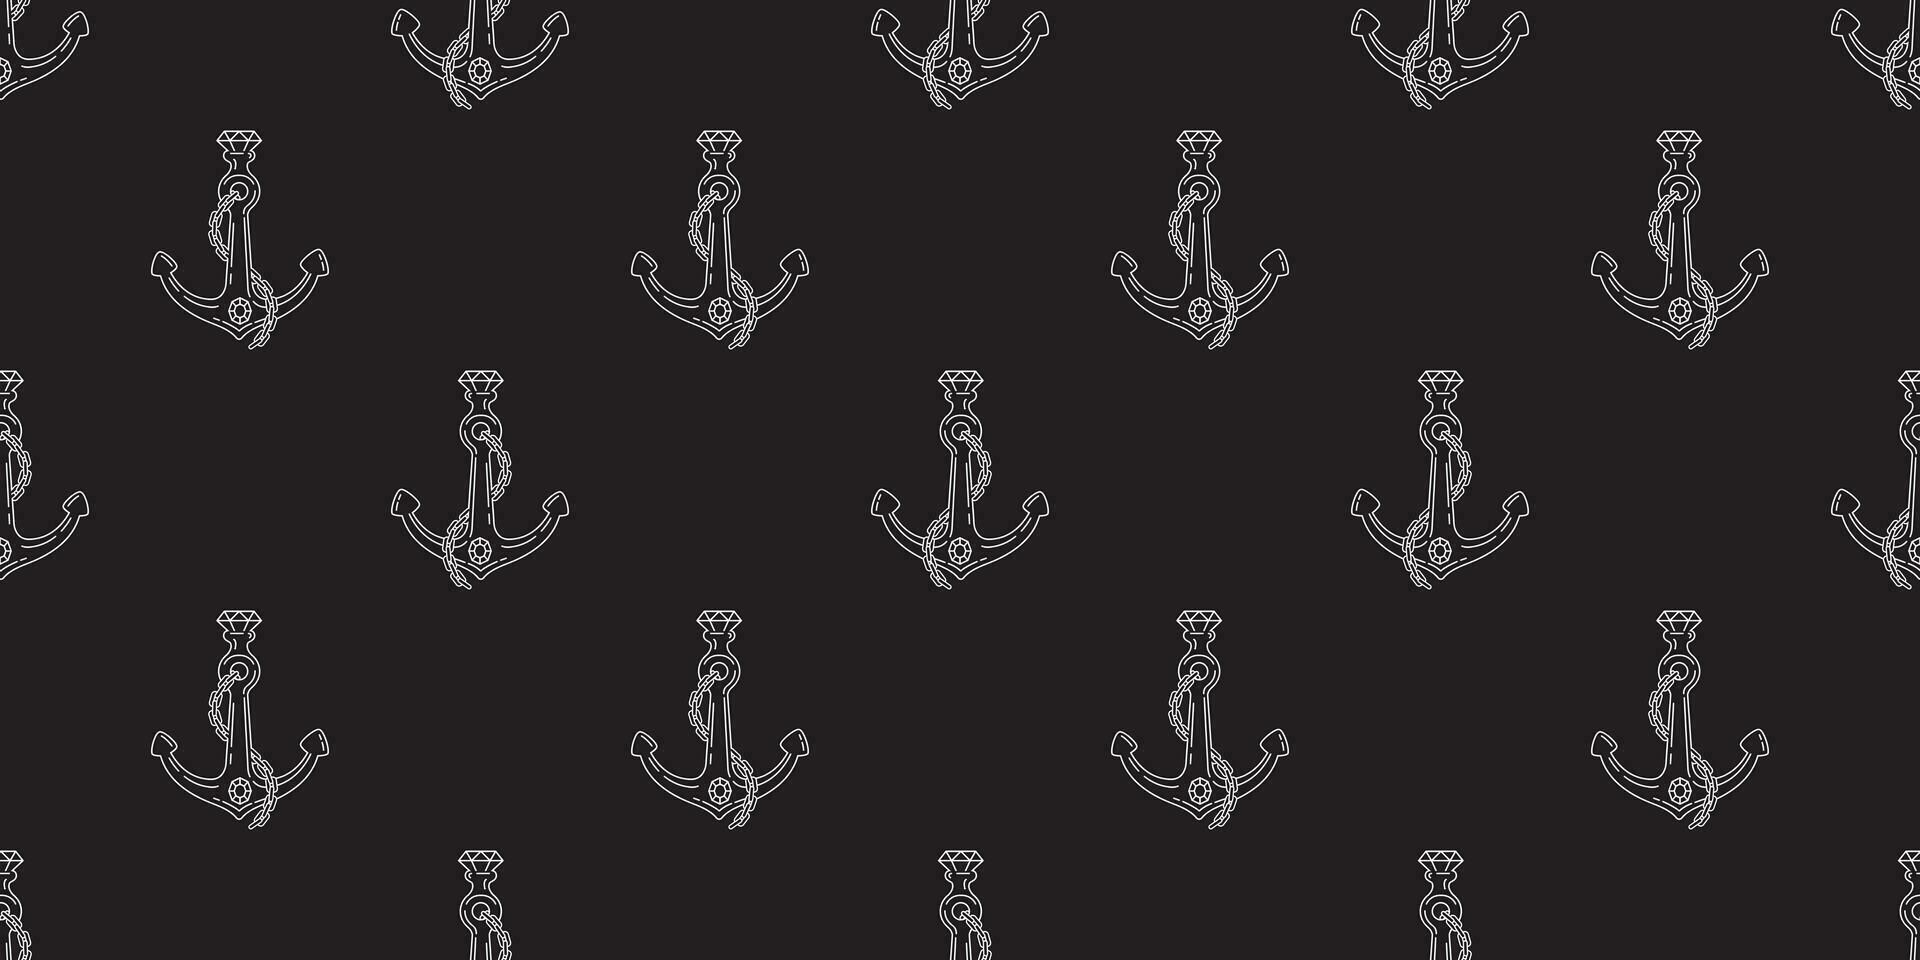 Anchor Seamless Pattern vector boat scarf isolated helm diamond gem nautical maritime tropical tile background repeat wallpaper black